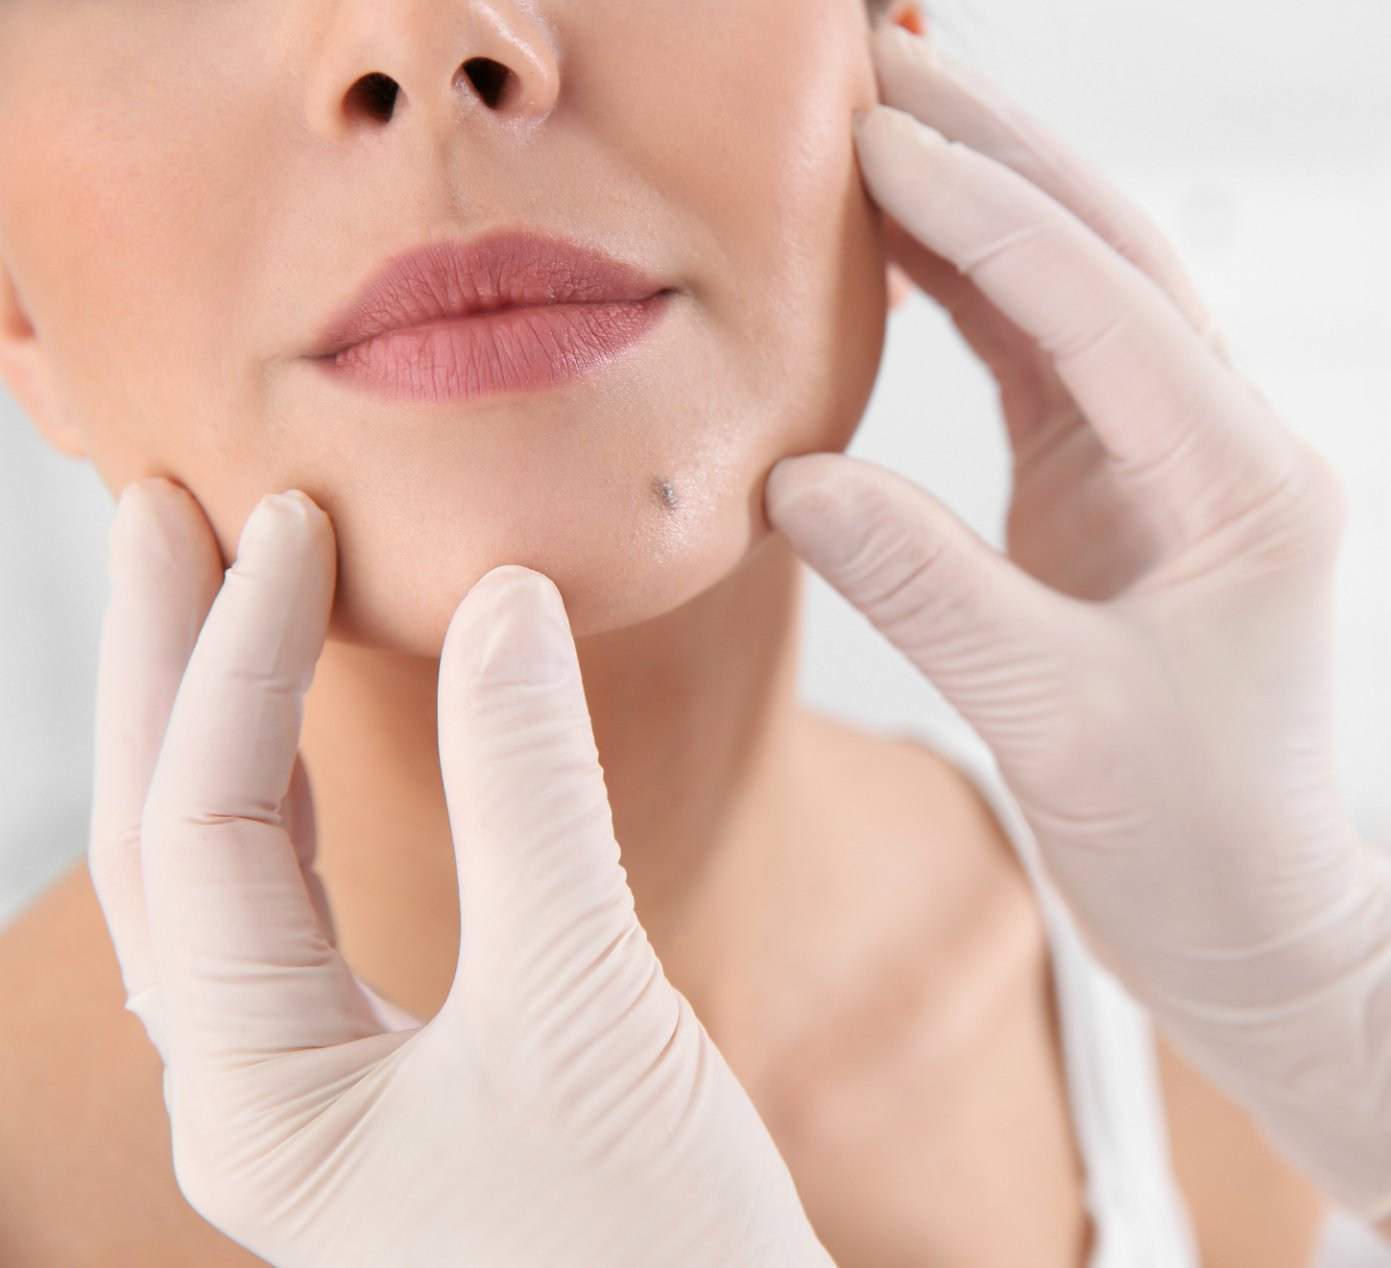 doctor examining mole on face of female patient